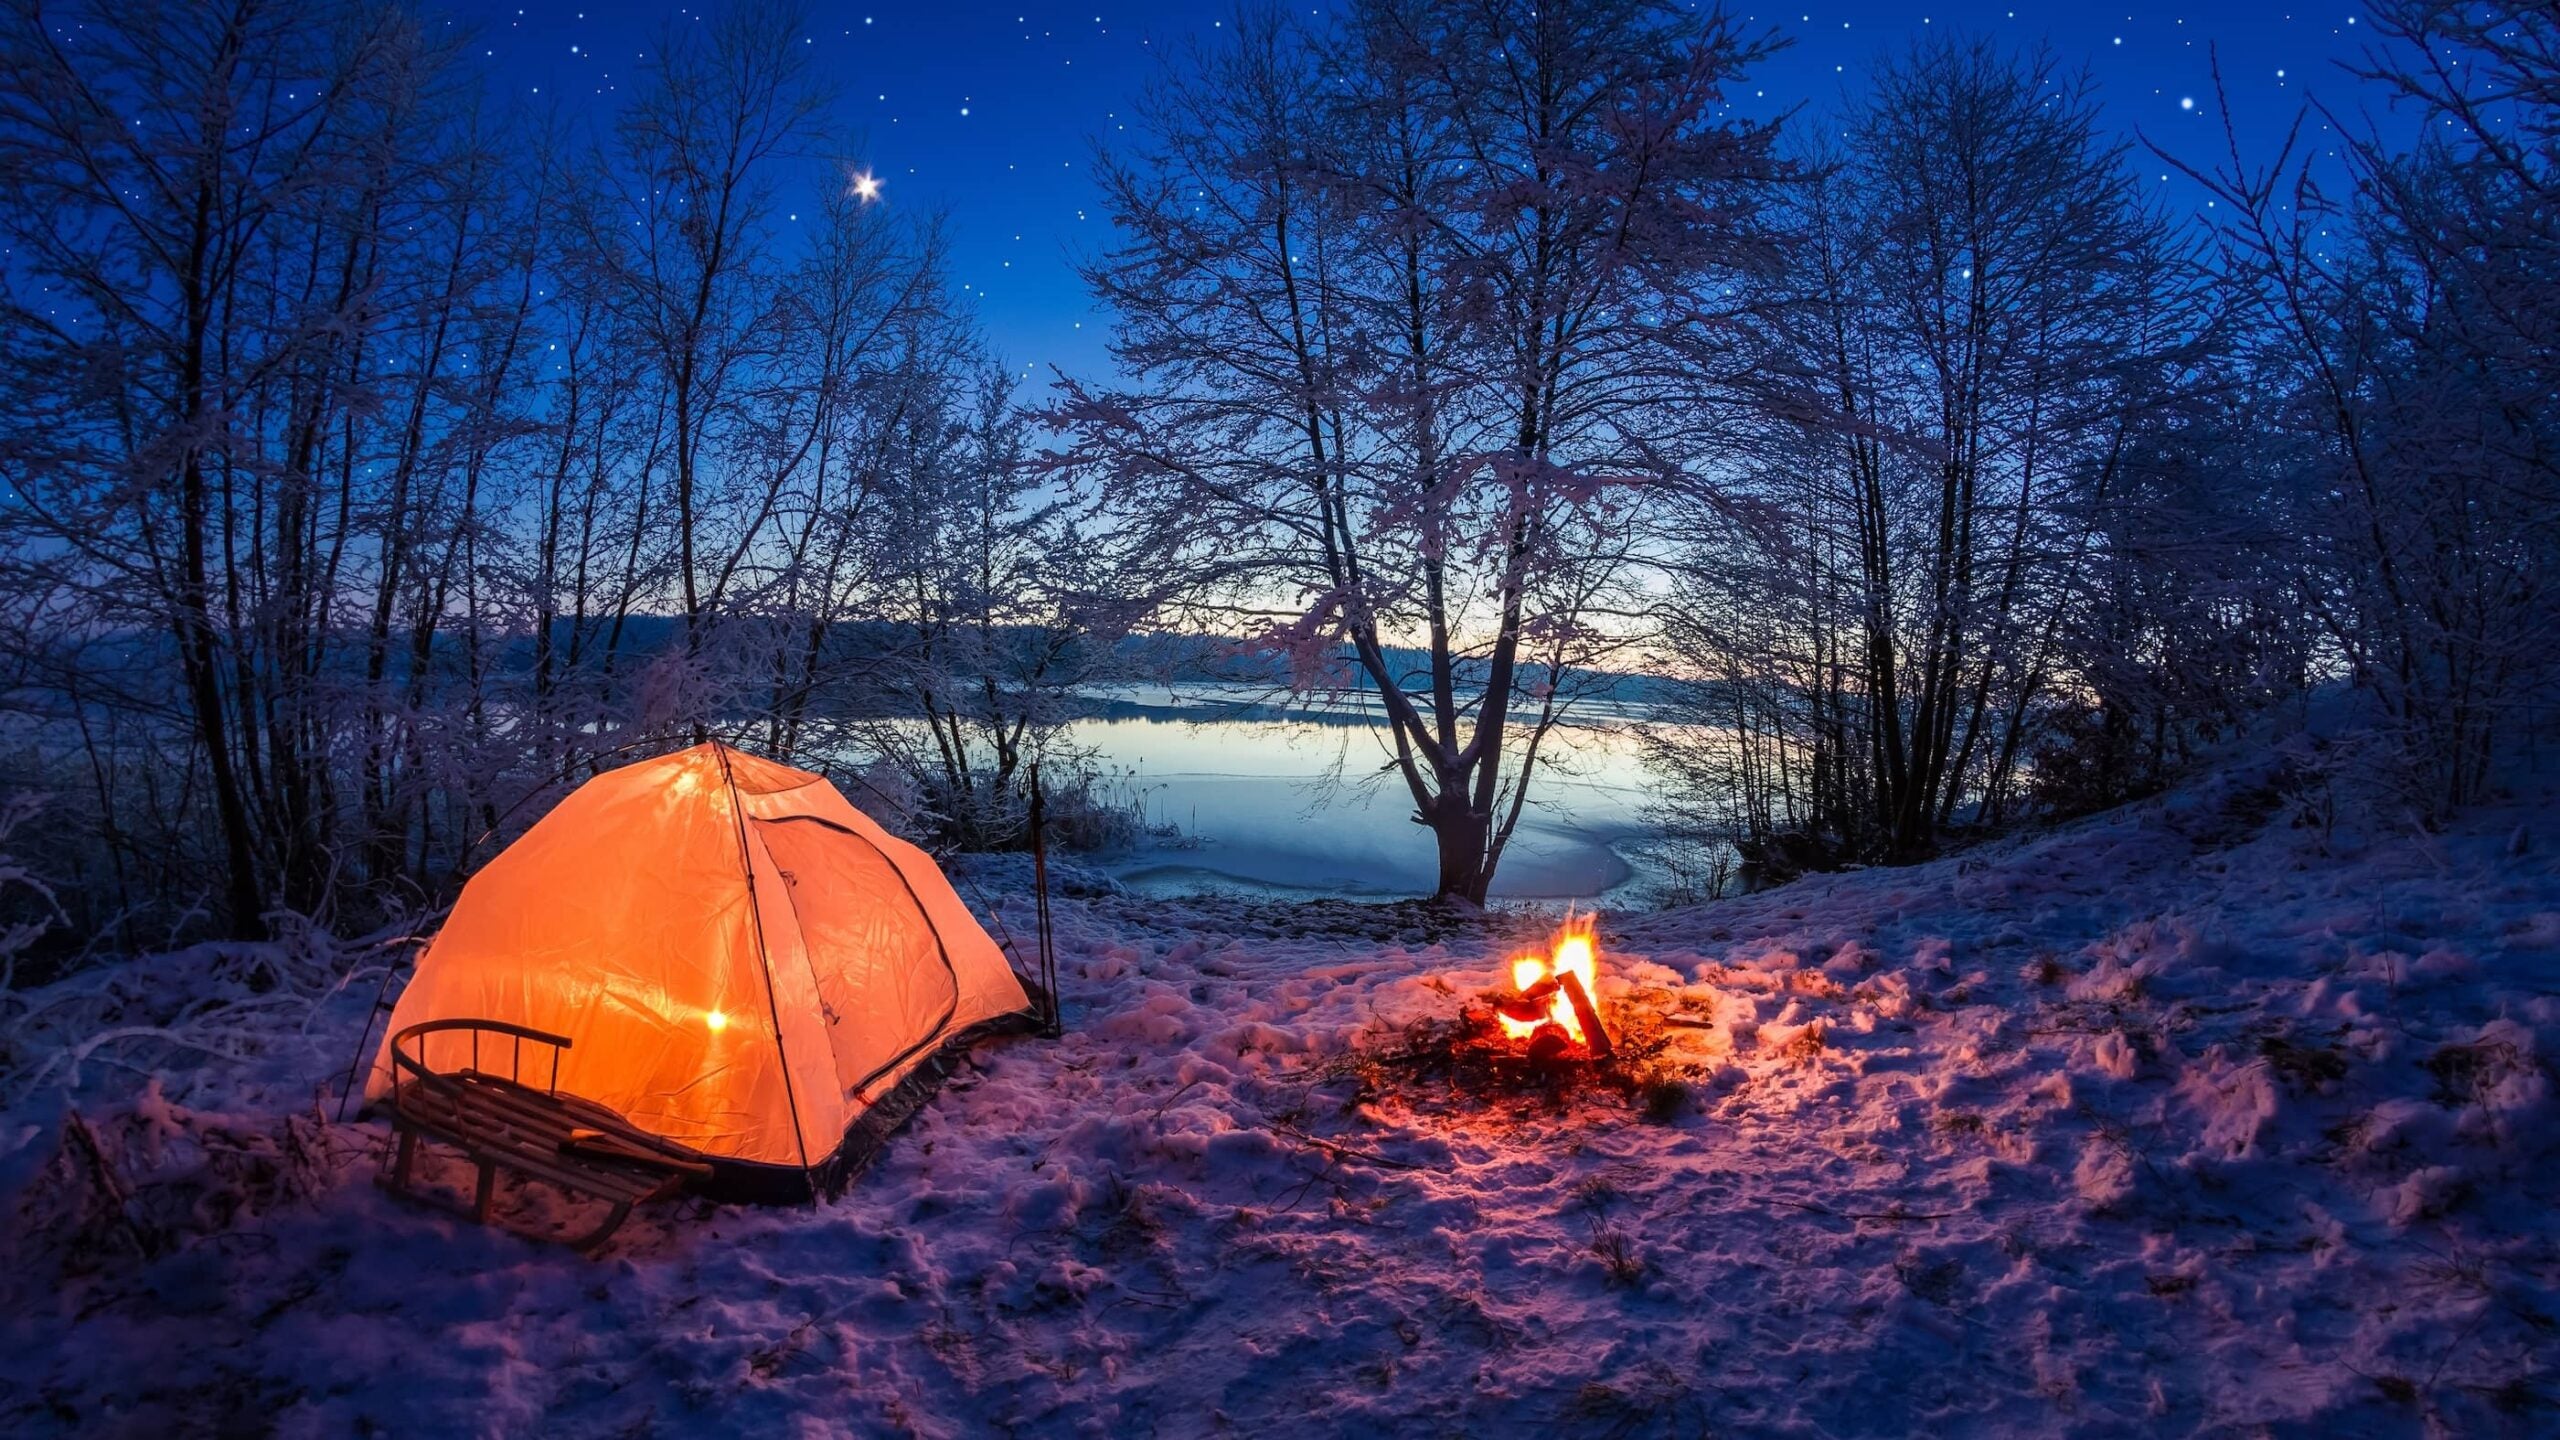 Winter Camping Tips to Make Your Trips Easier & Safer